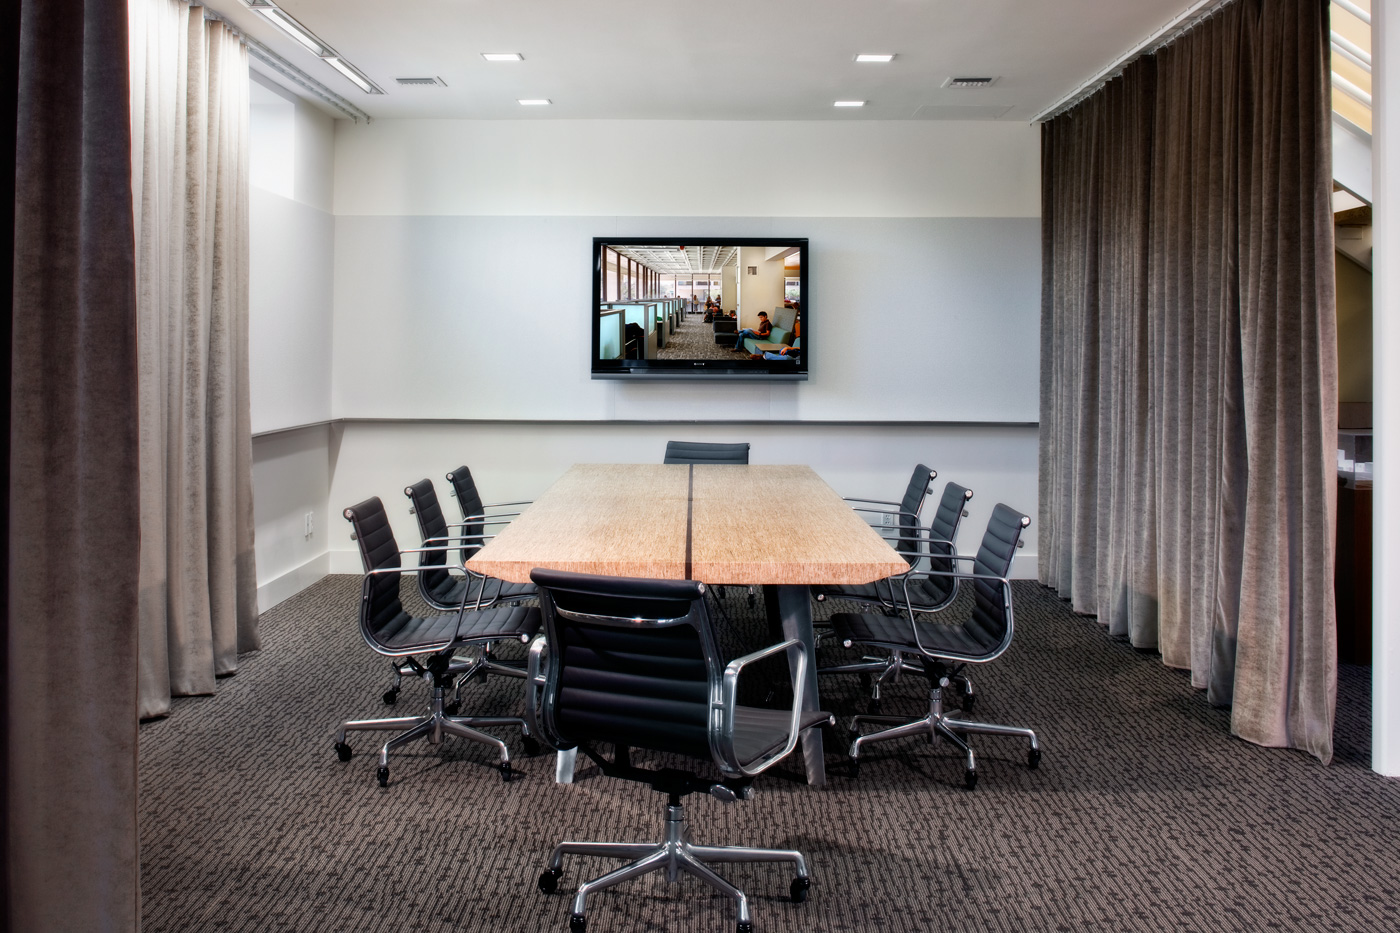 An offices large conference room with wrap around curtains.